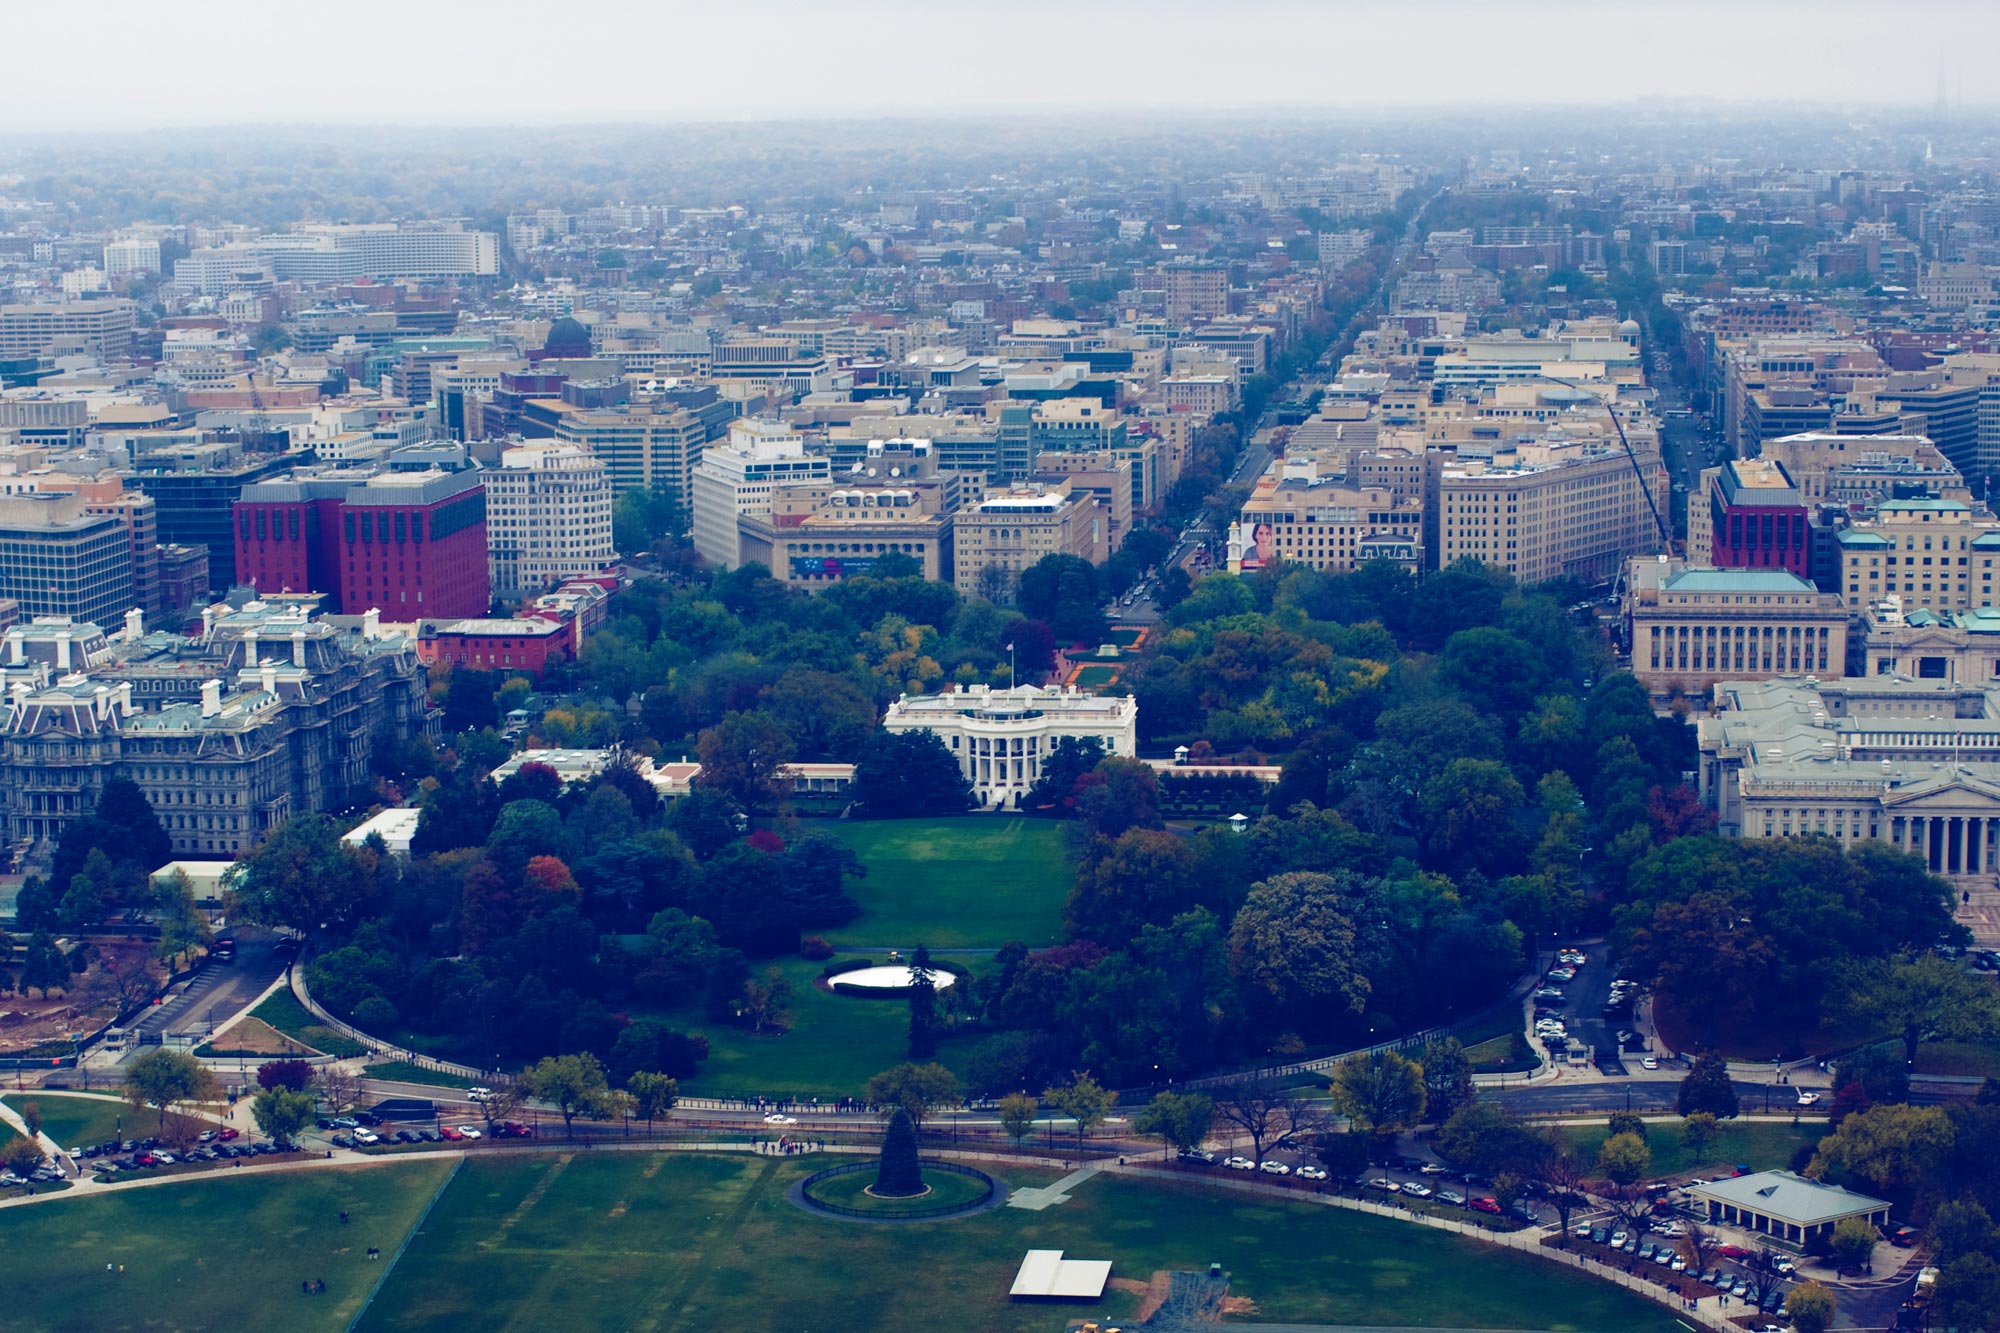 Aerial view of the White House of the United States of America